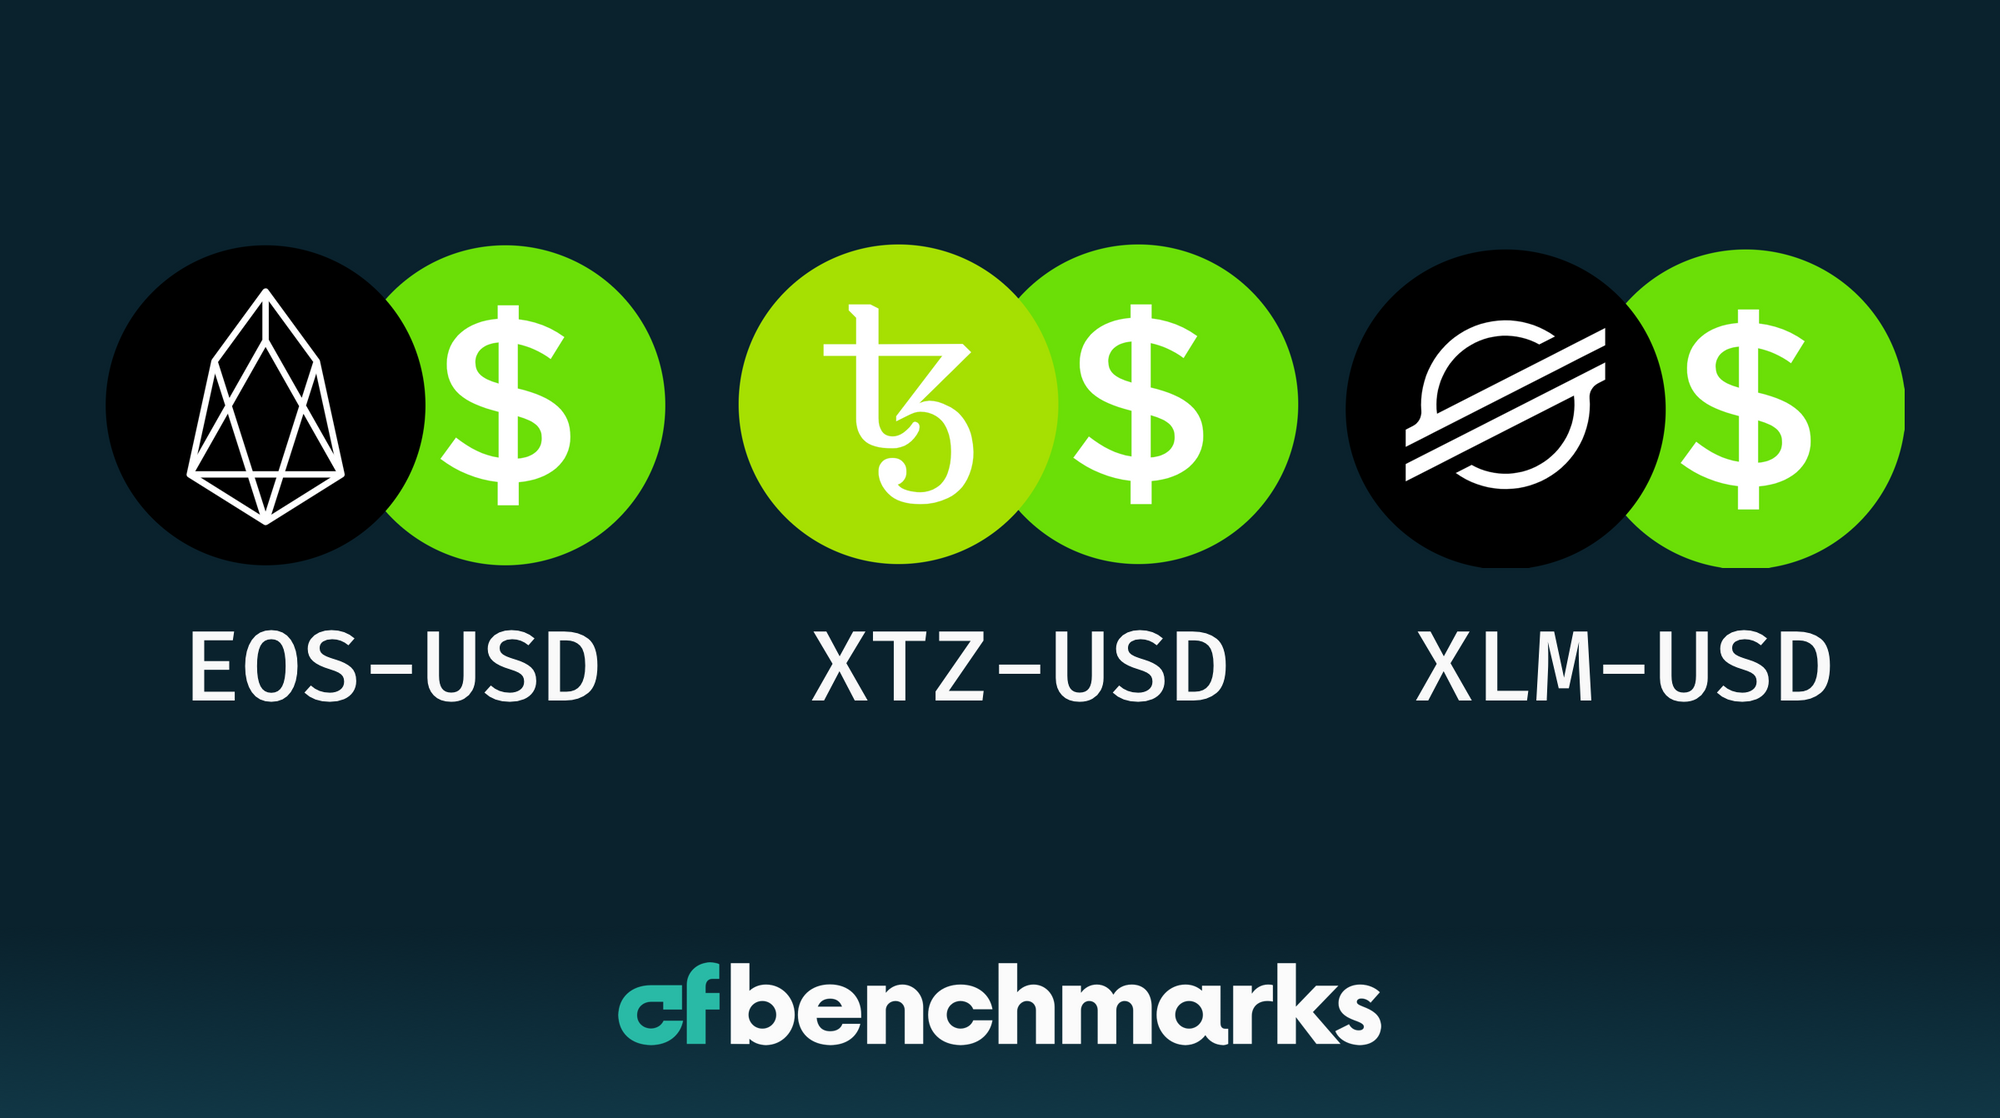 CF Benchmarks Launches Indices for Tezos, Stellar Lumens and EOS